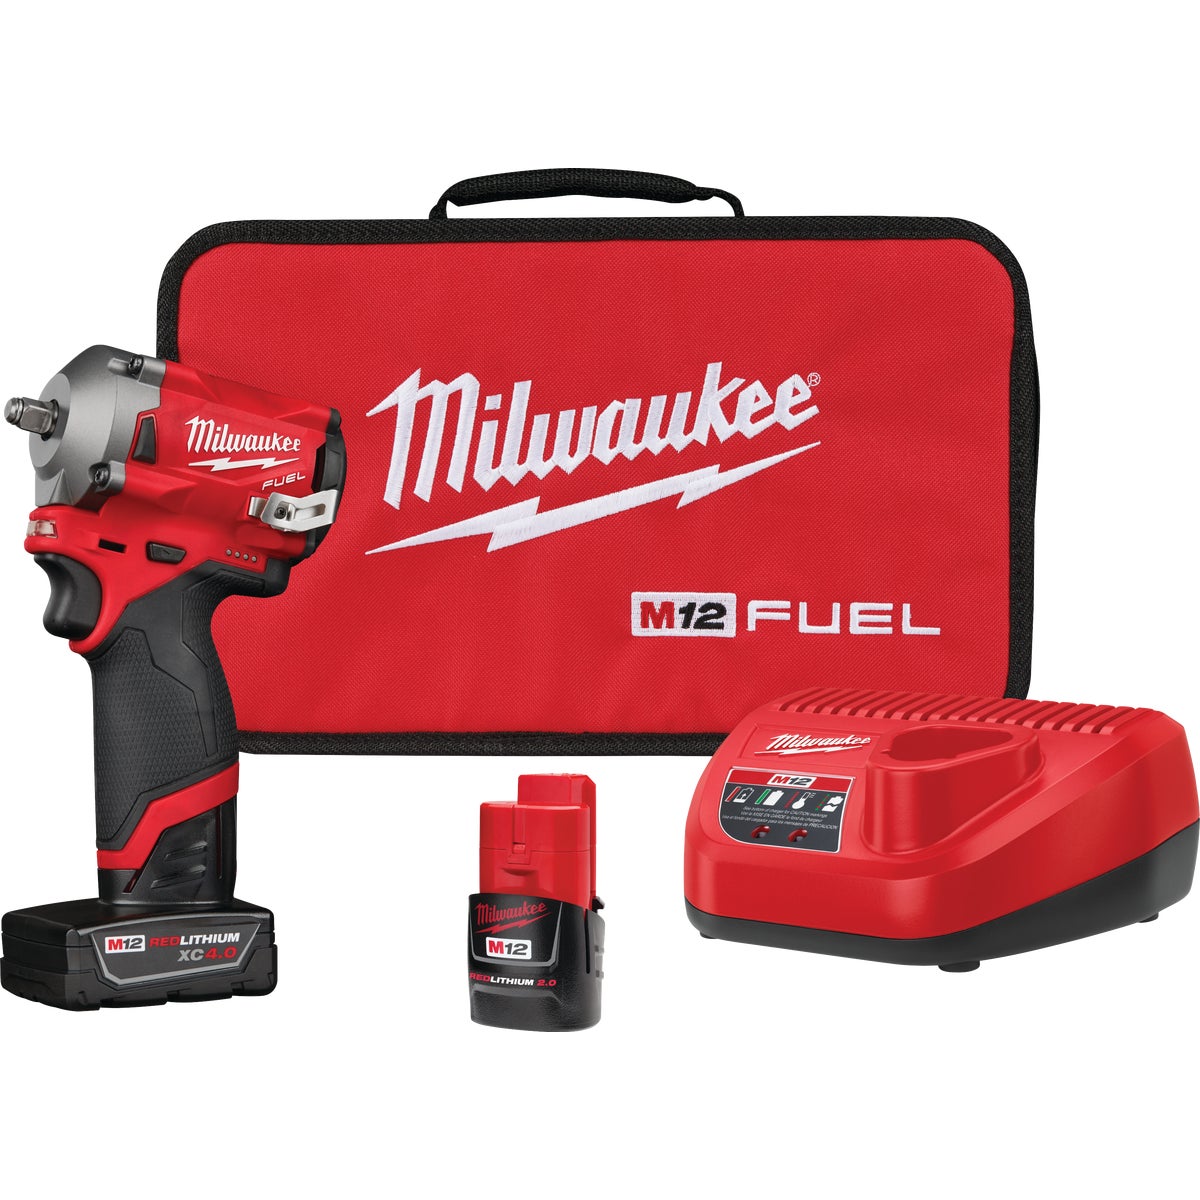 Milwaukee M12 FUEL 12 Volt Lithium-Ion Brushless 3/8 In. Stubby Cordless Impact Wrench Kit